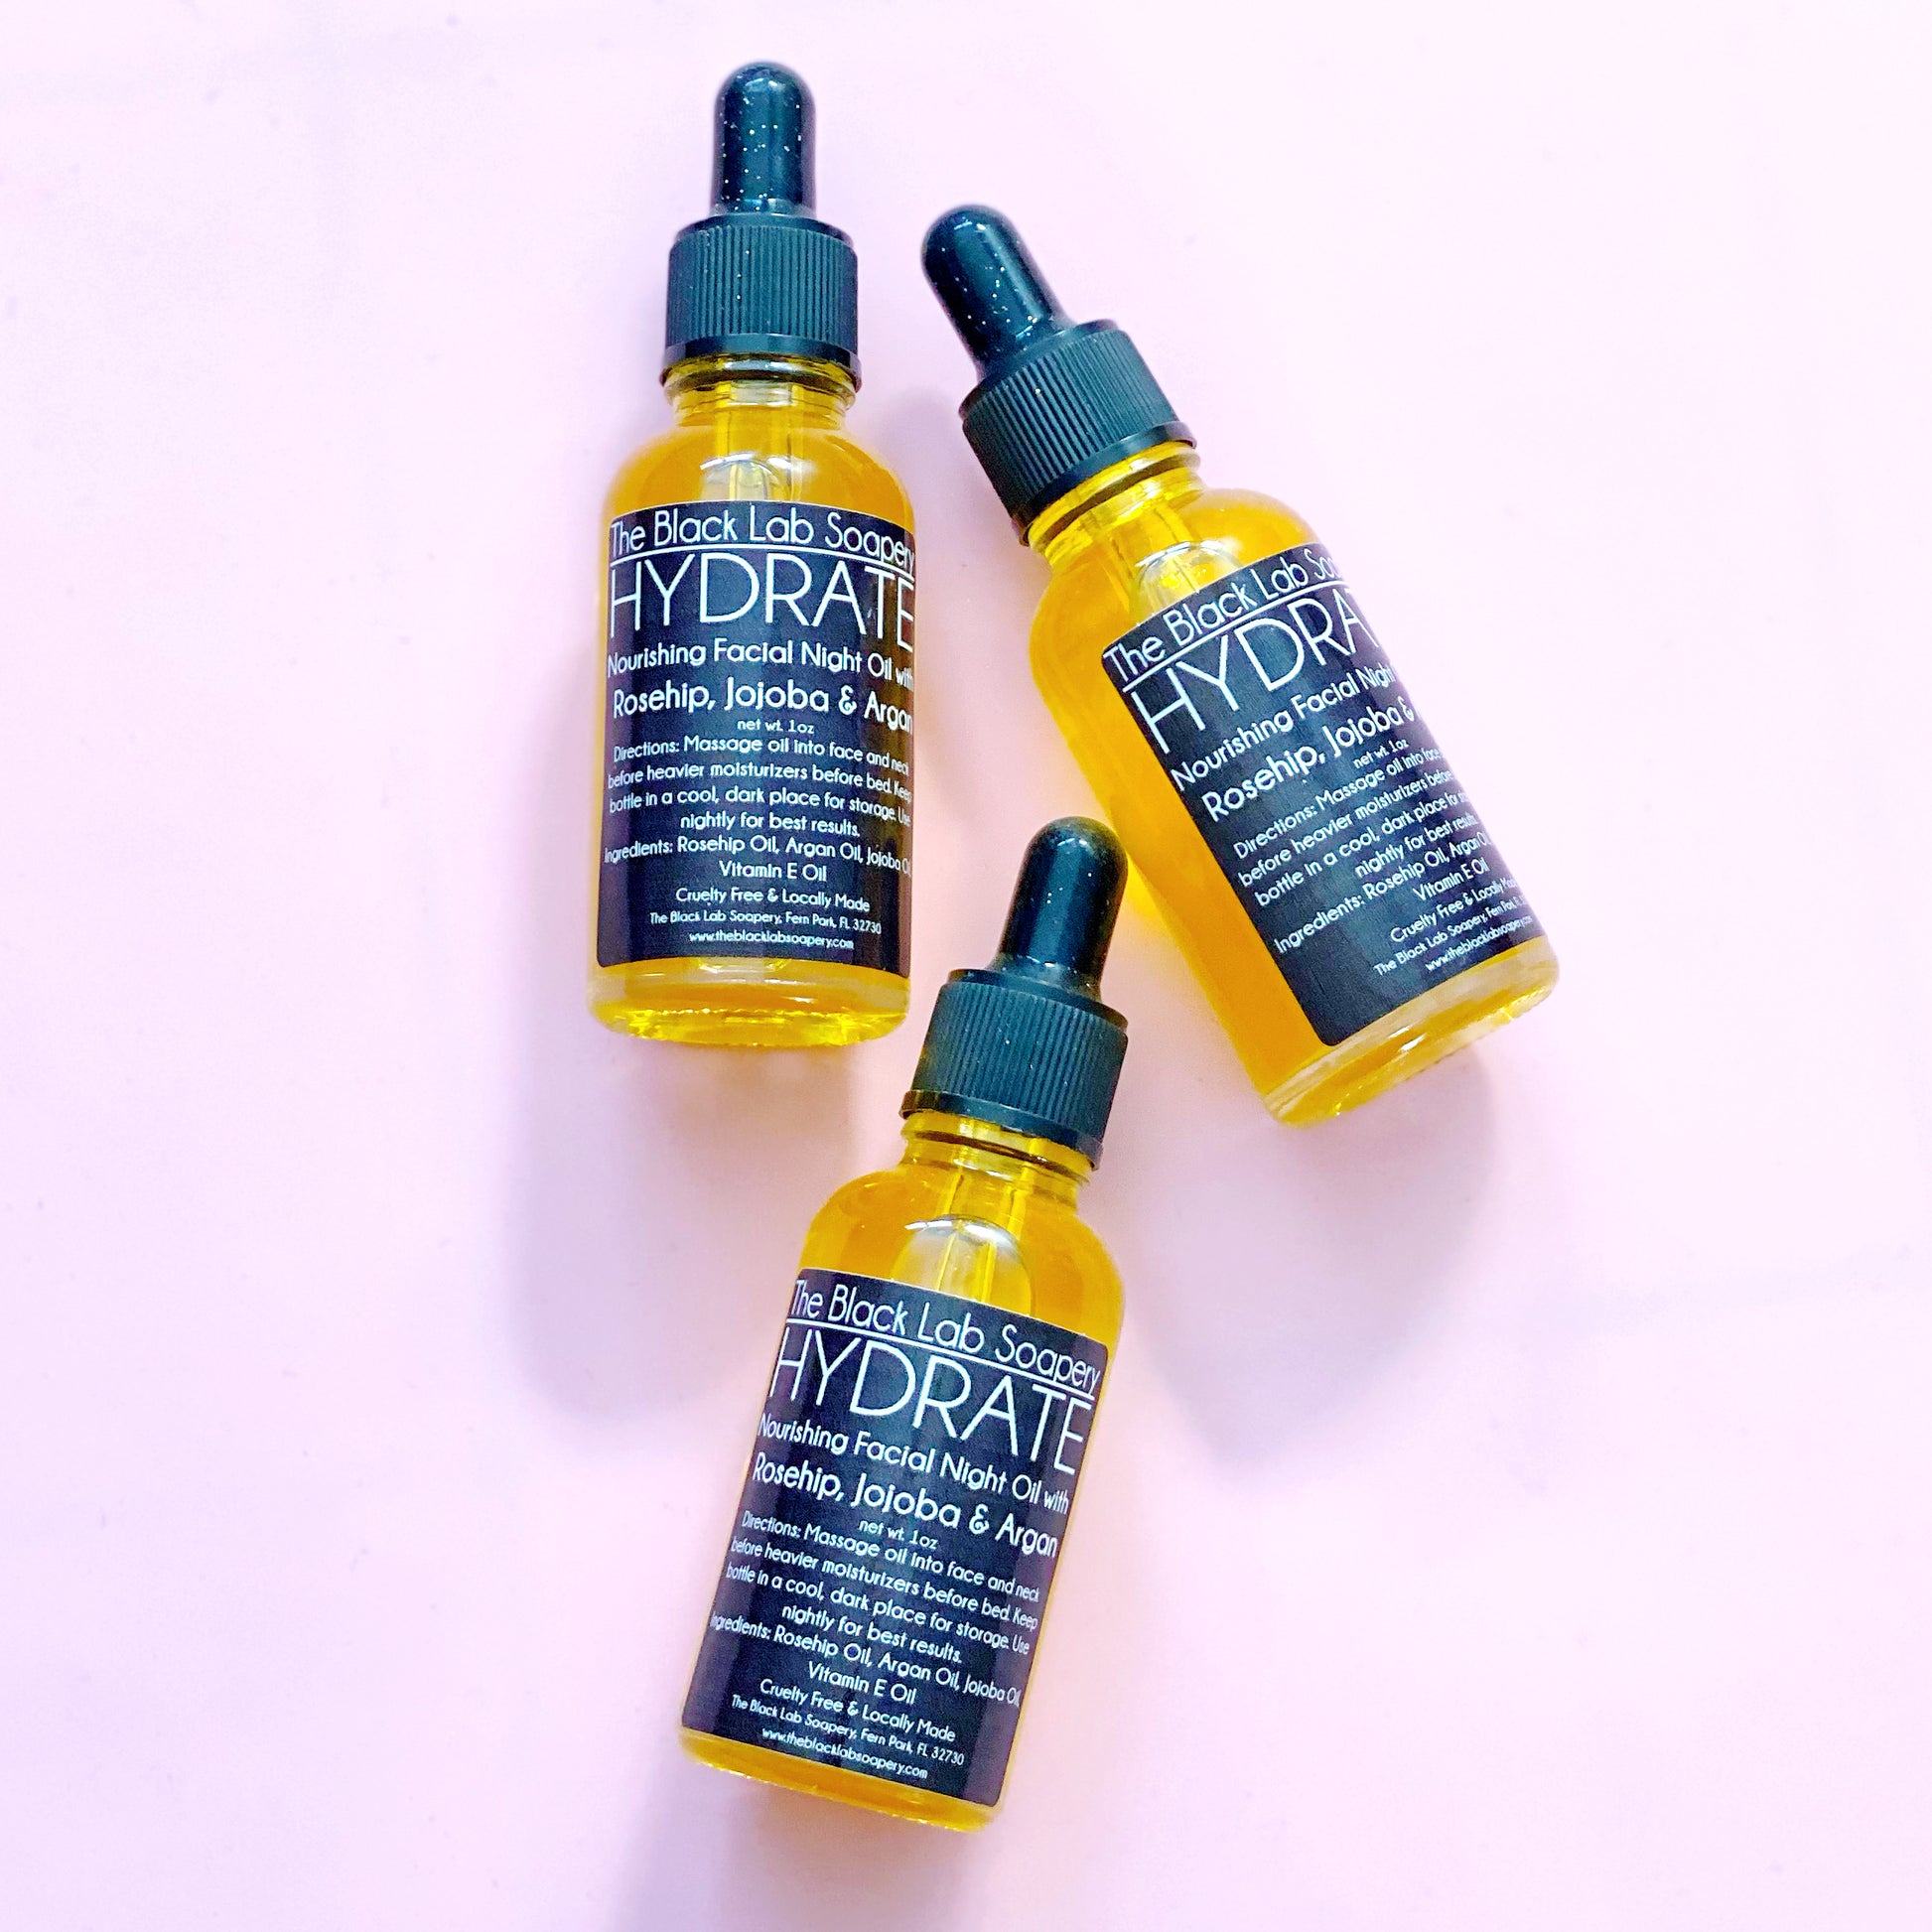 HYDRATE - Nourishing Facial Night Oil - The Black Lab Soapery